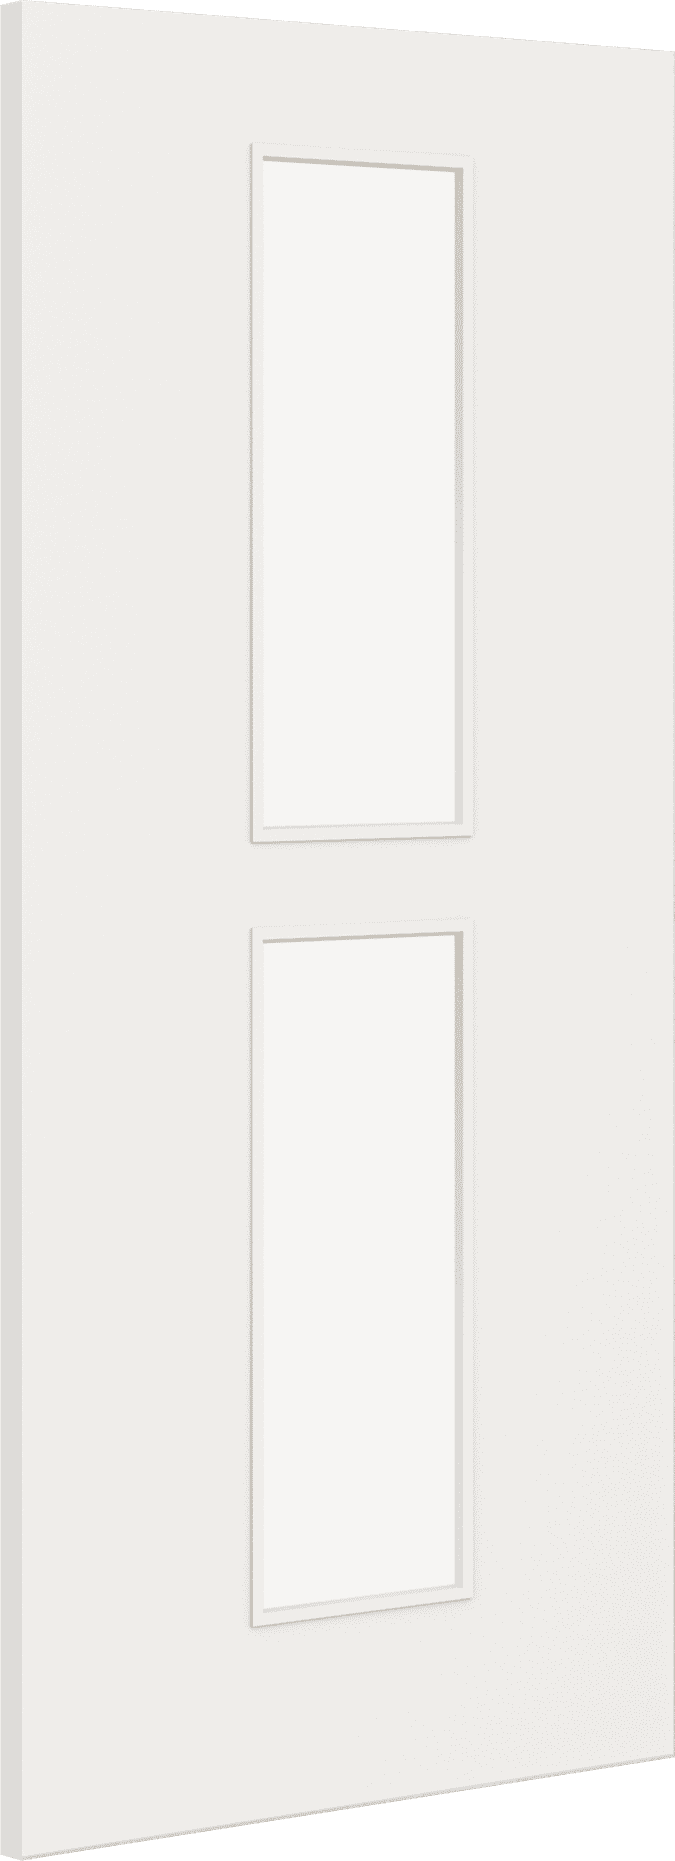 1981mm x 610mm x 44mm (24") Architectural Paint Grade White 12 Frosted Glazed Fire Door Blank